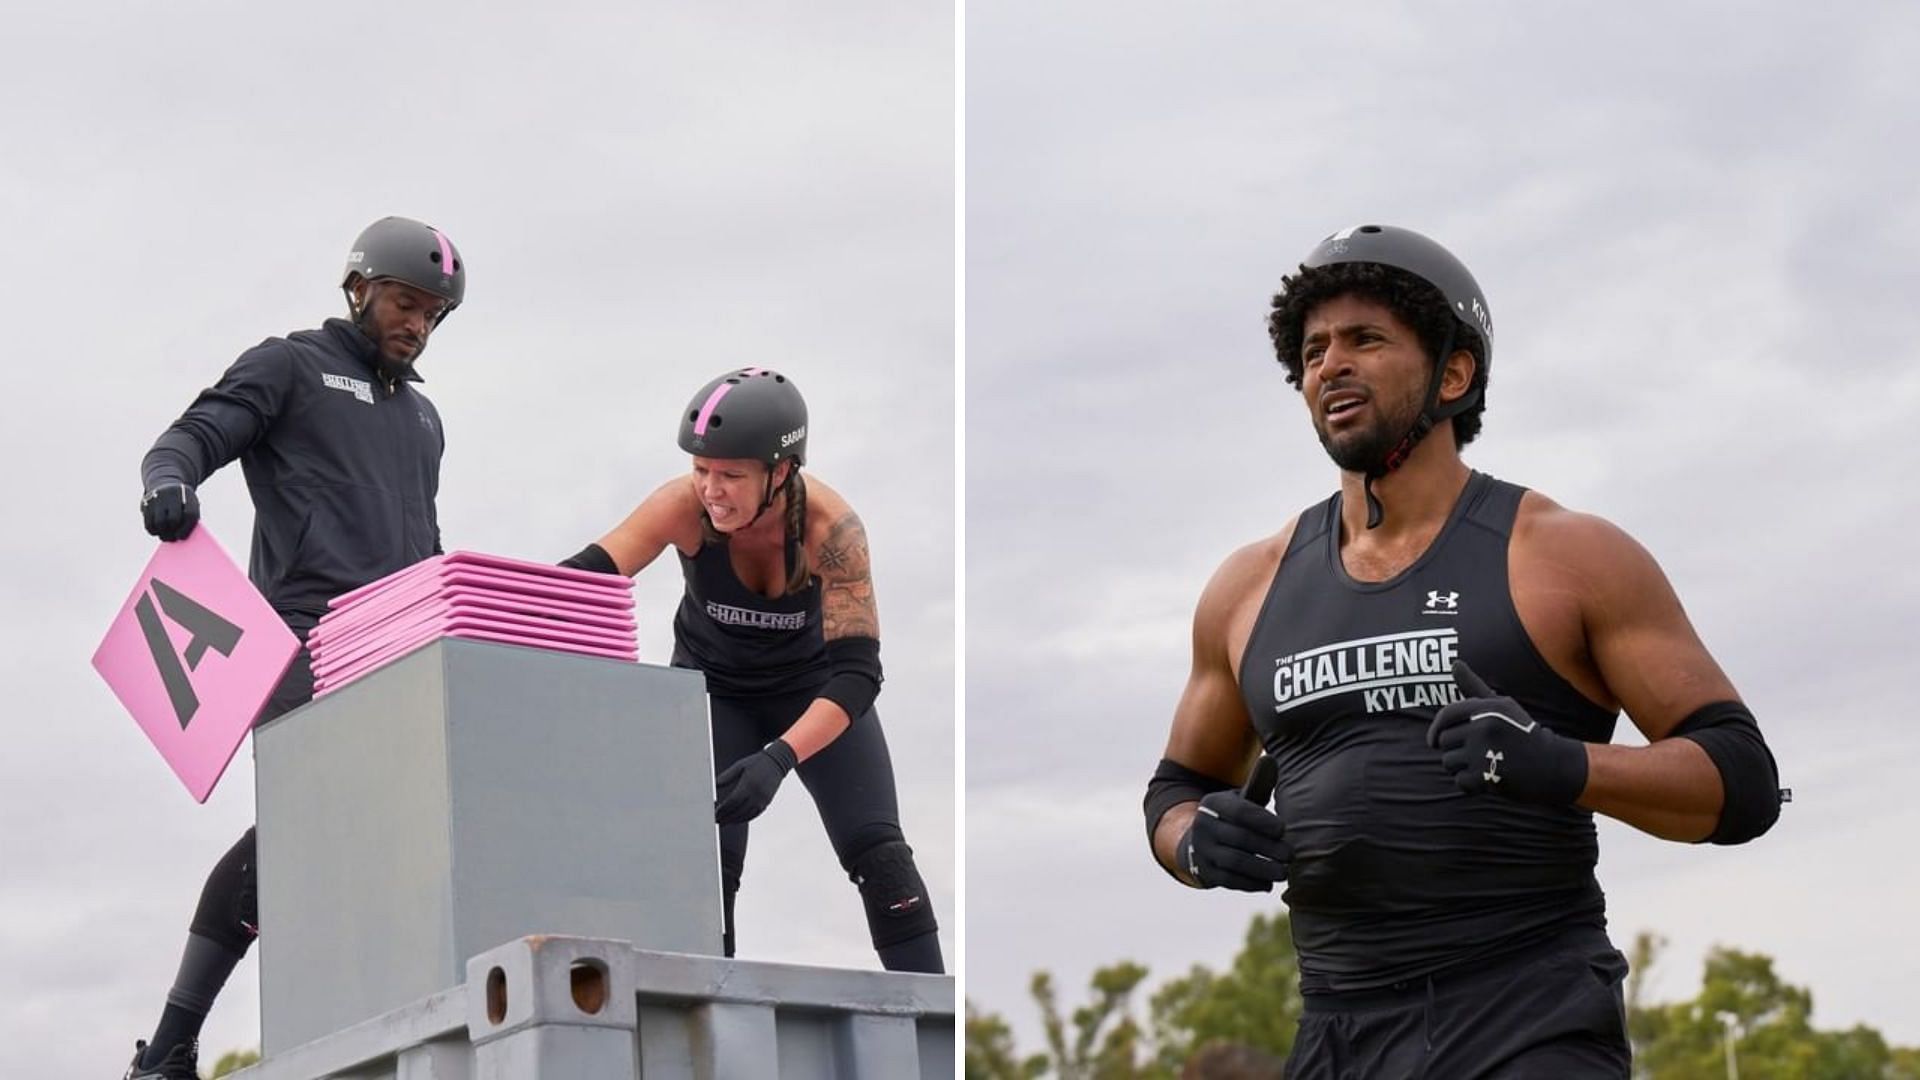 The Challenge: USA aired its third episode on Wednesday (Image via thechallenge/Instagram)